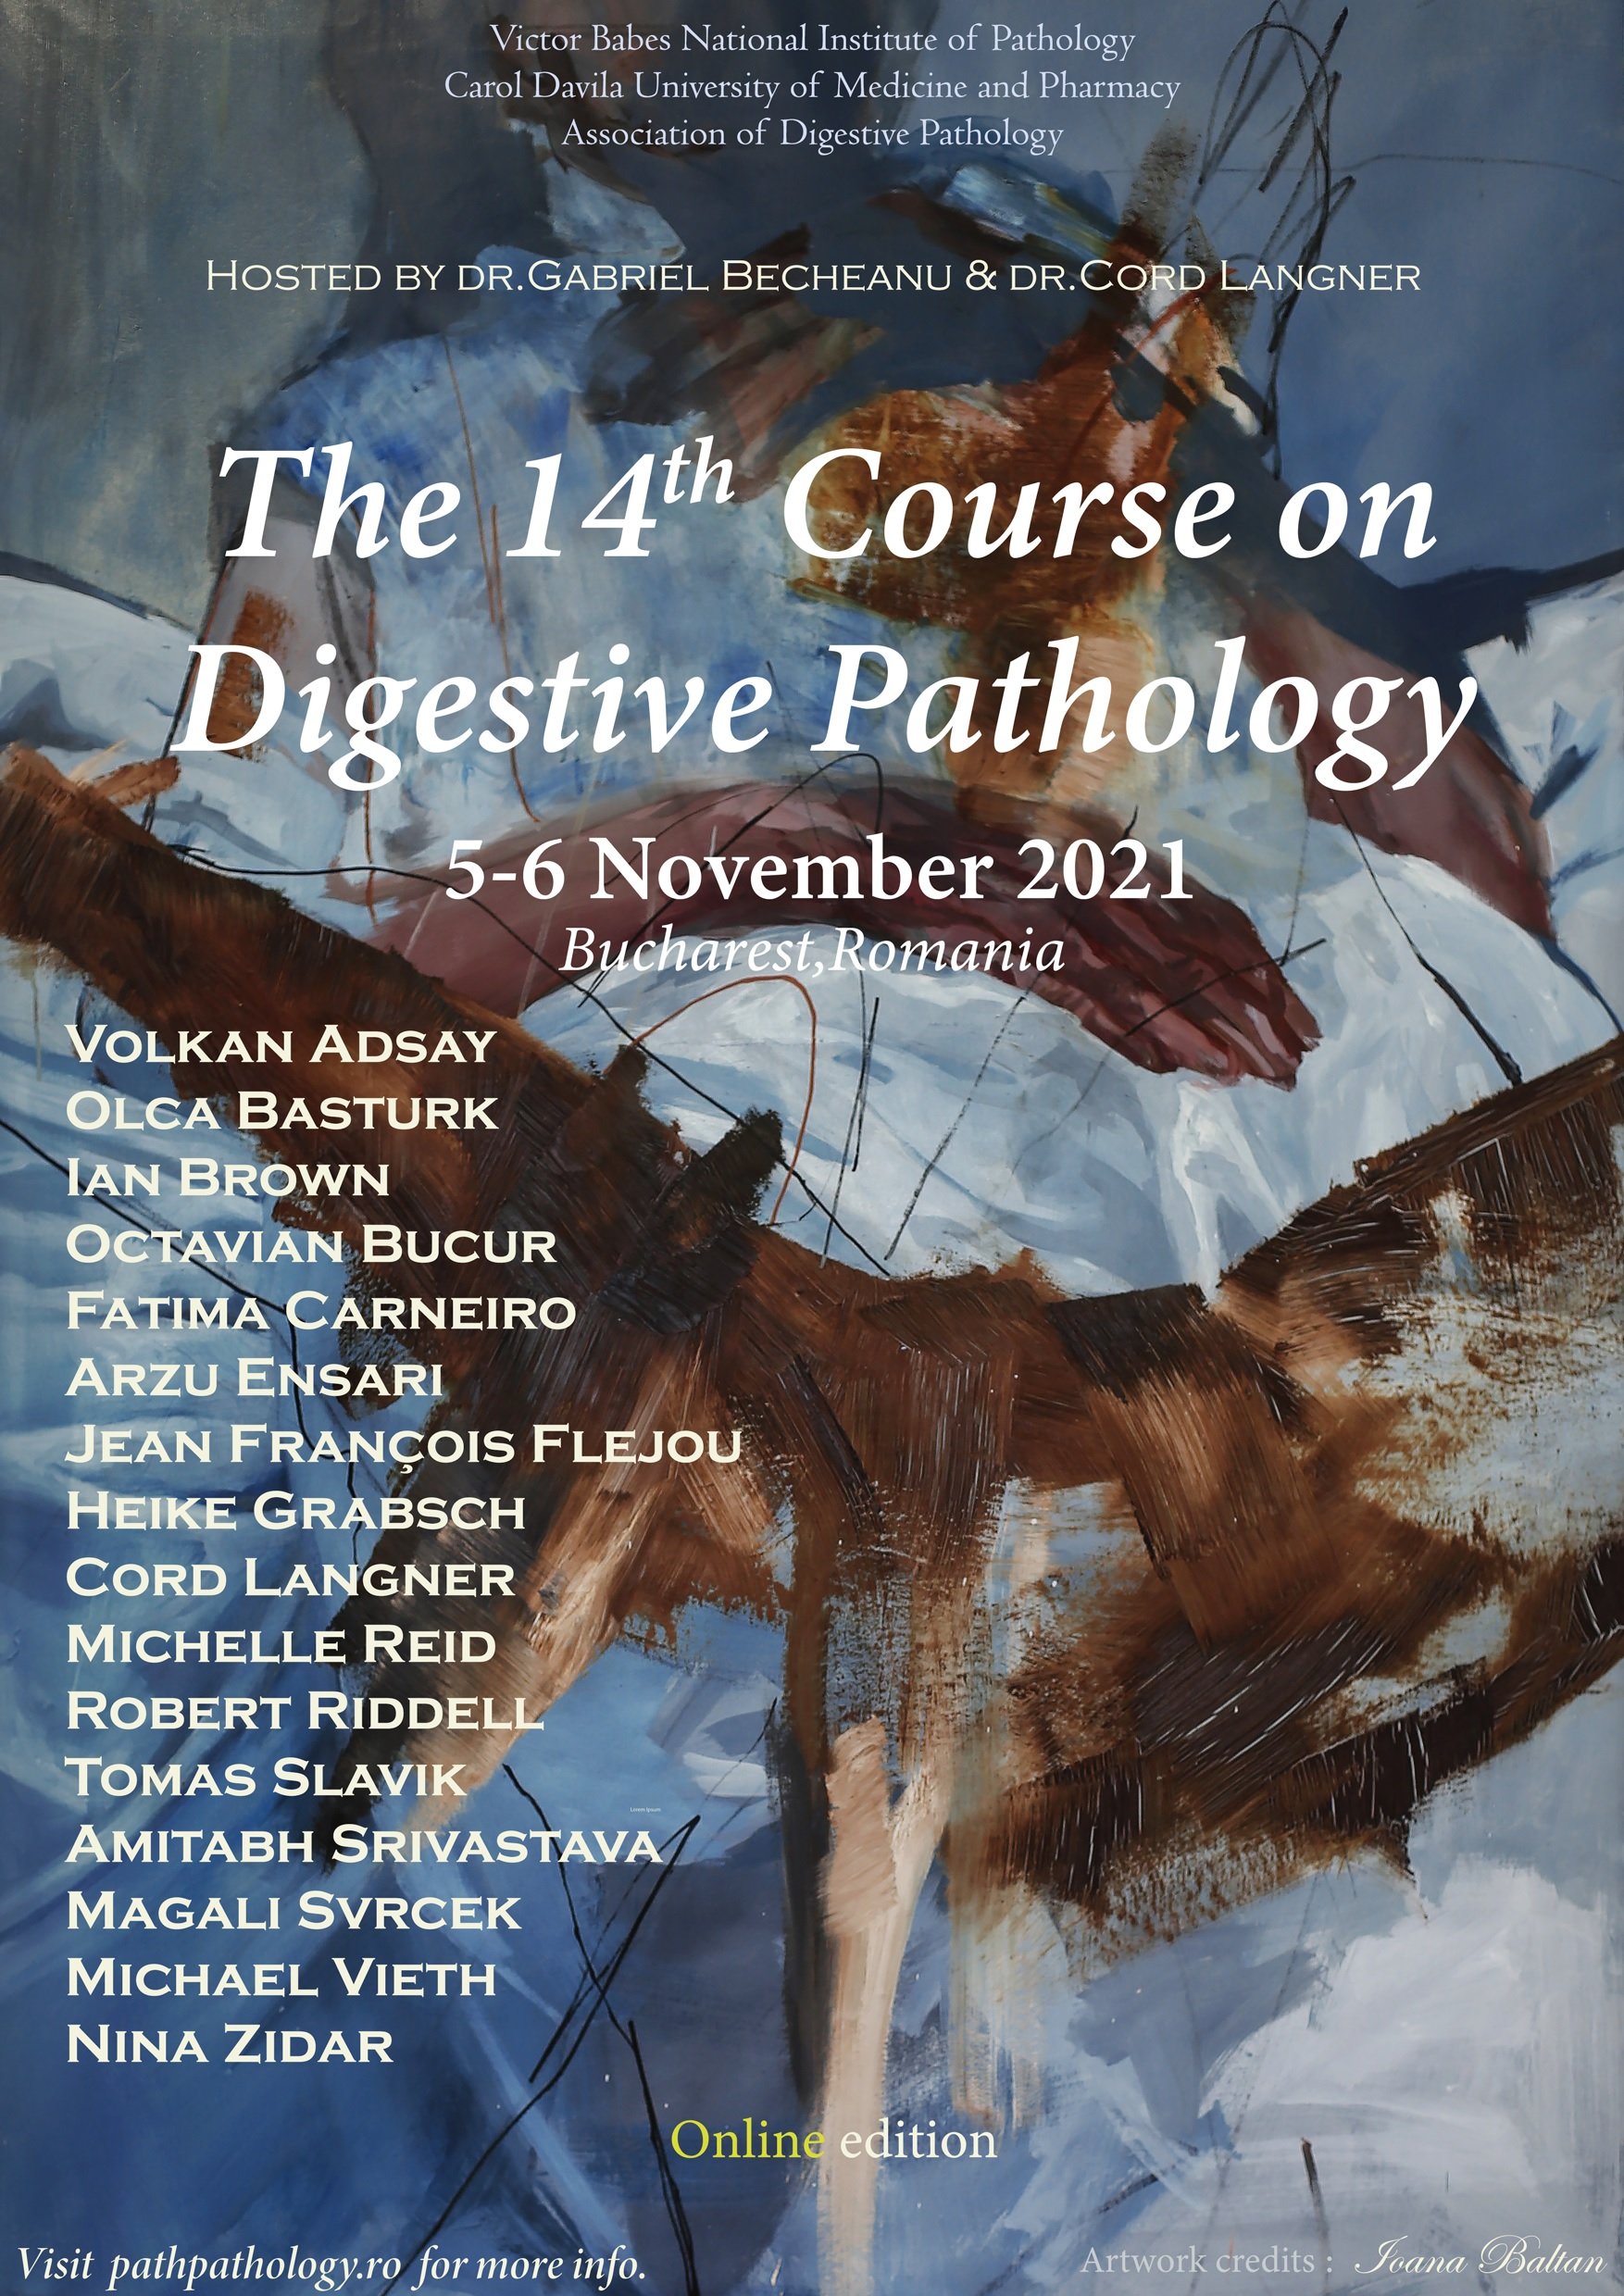 Lecture at the 14th Course on Digestive Pathology